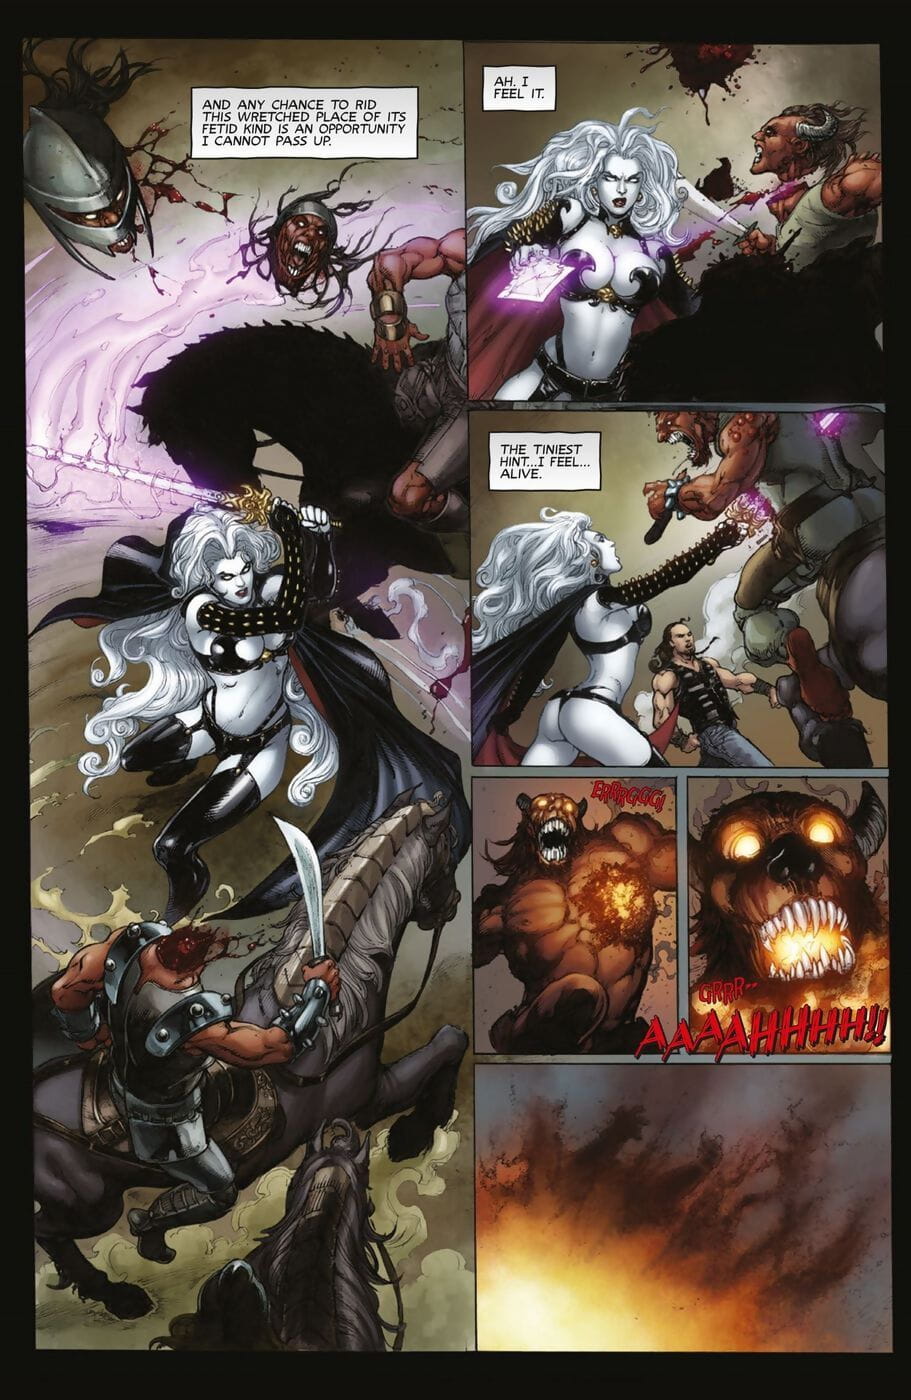 Coffin-Brian Pulido  Lady Death Rules! Volume 1 page 1